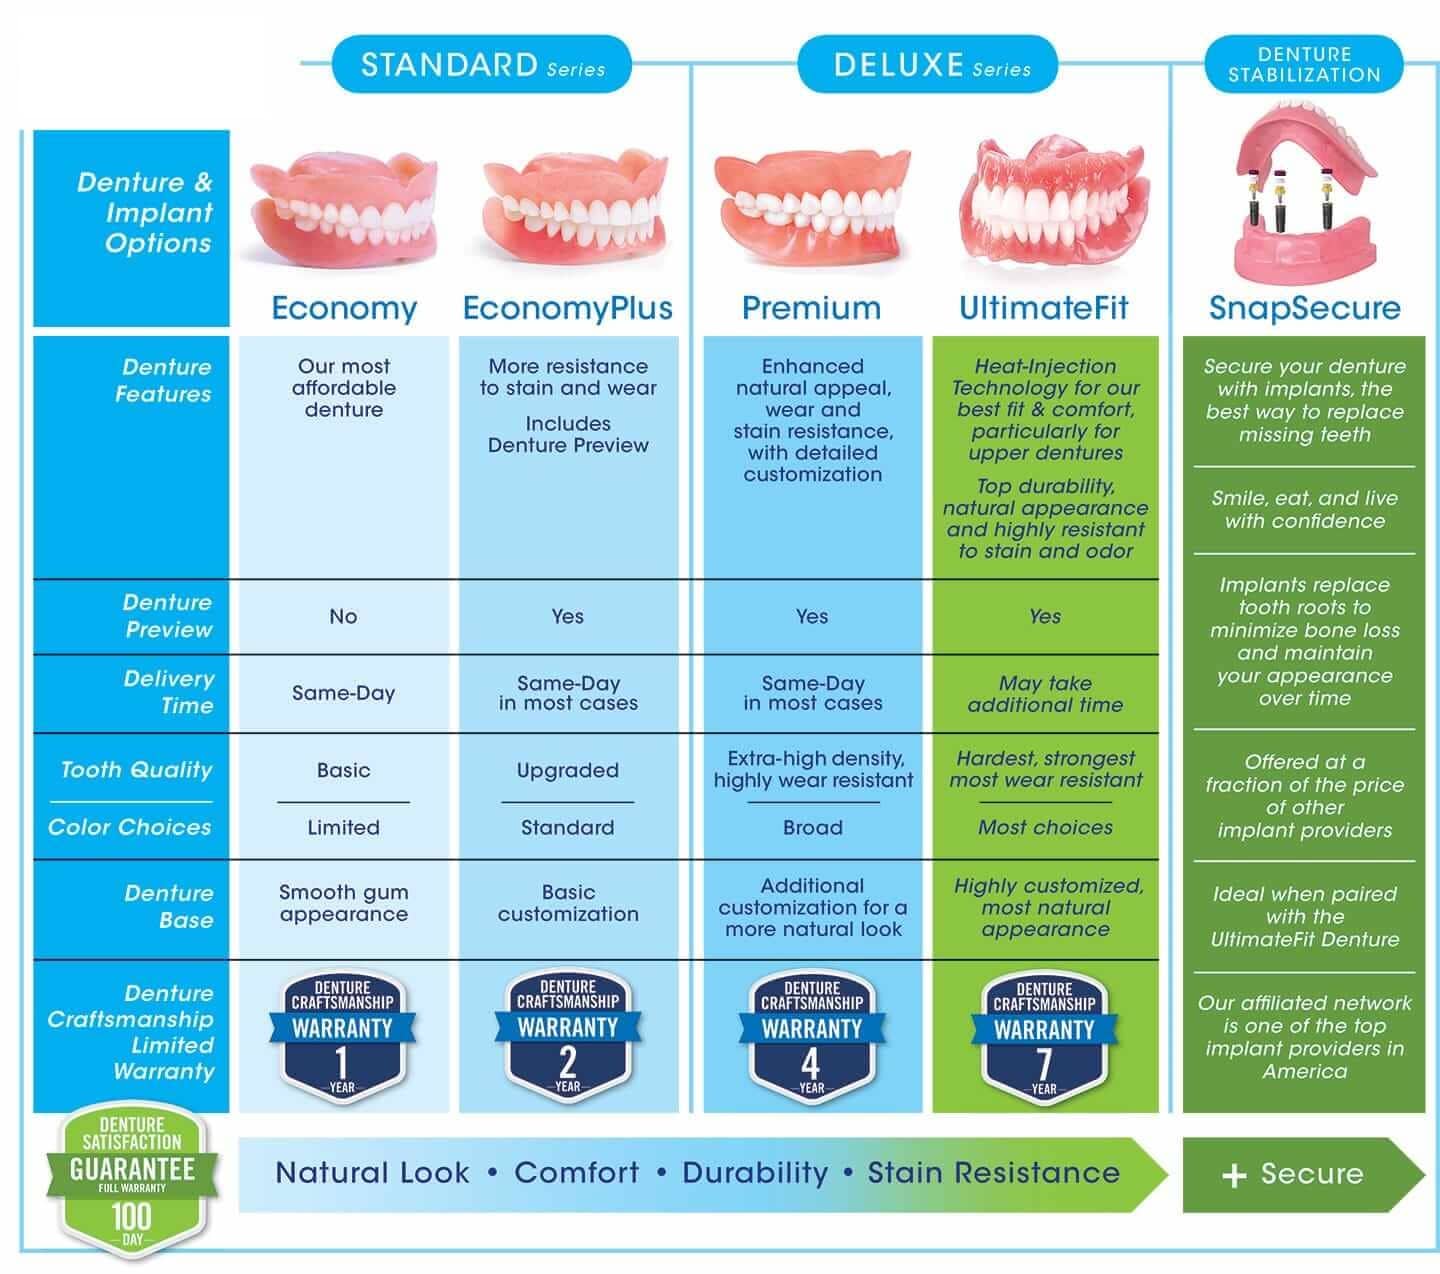 Affordable Dentures or Aspen Dental? What is the Best Brand for